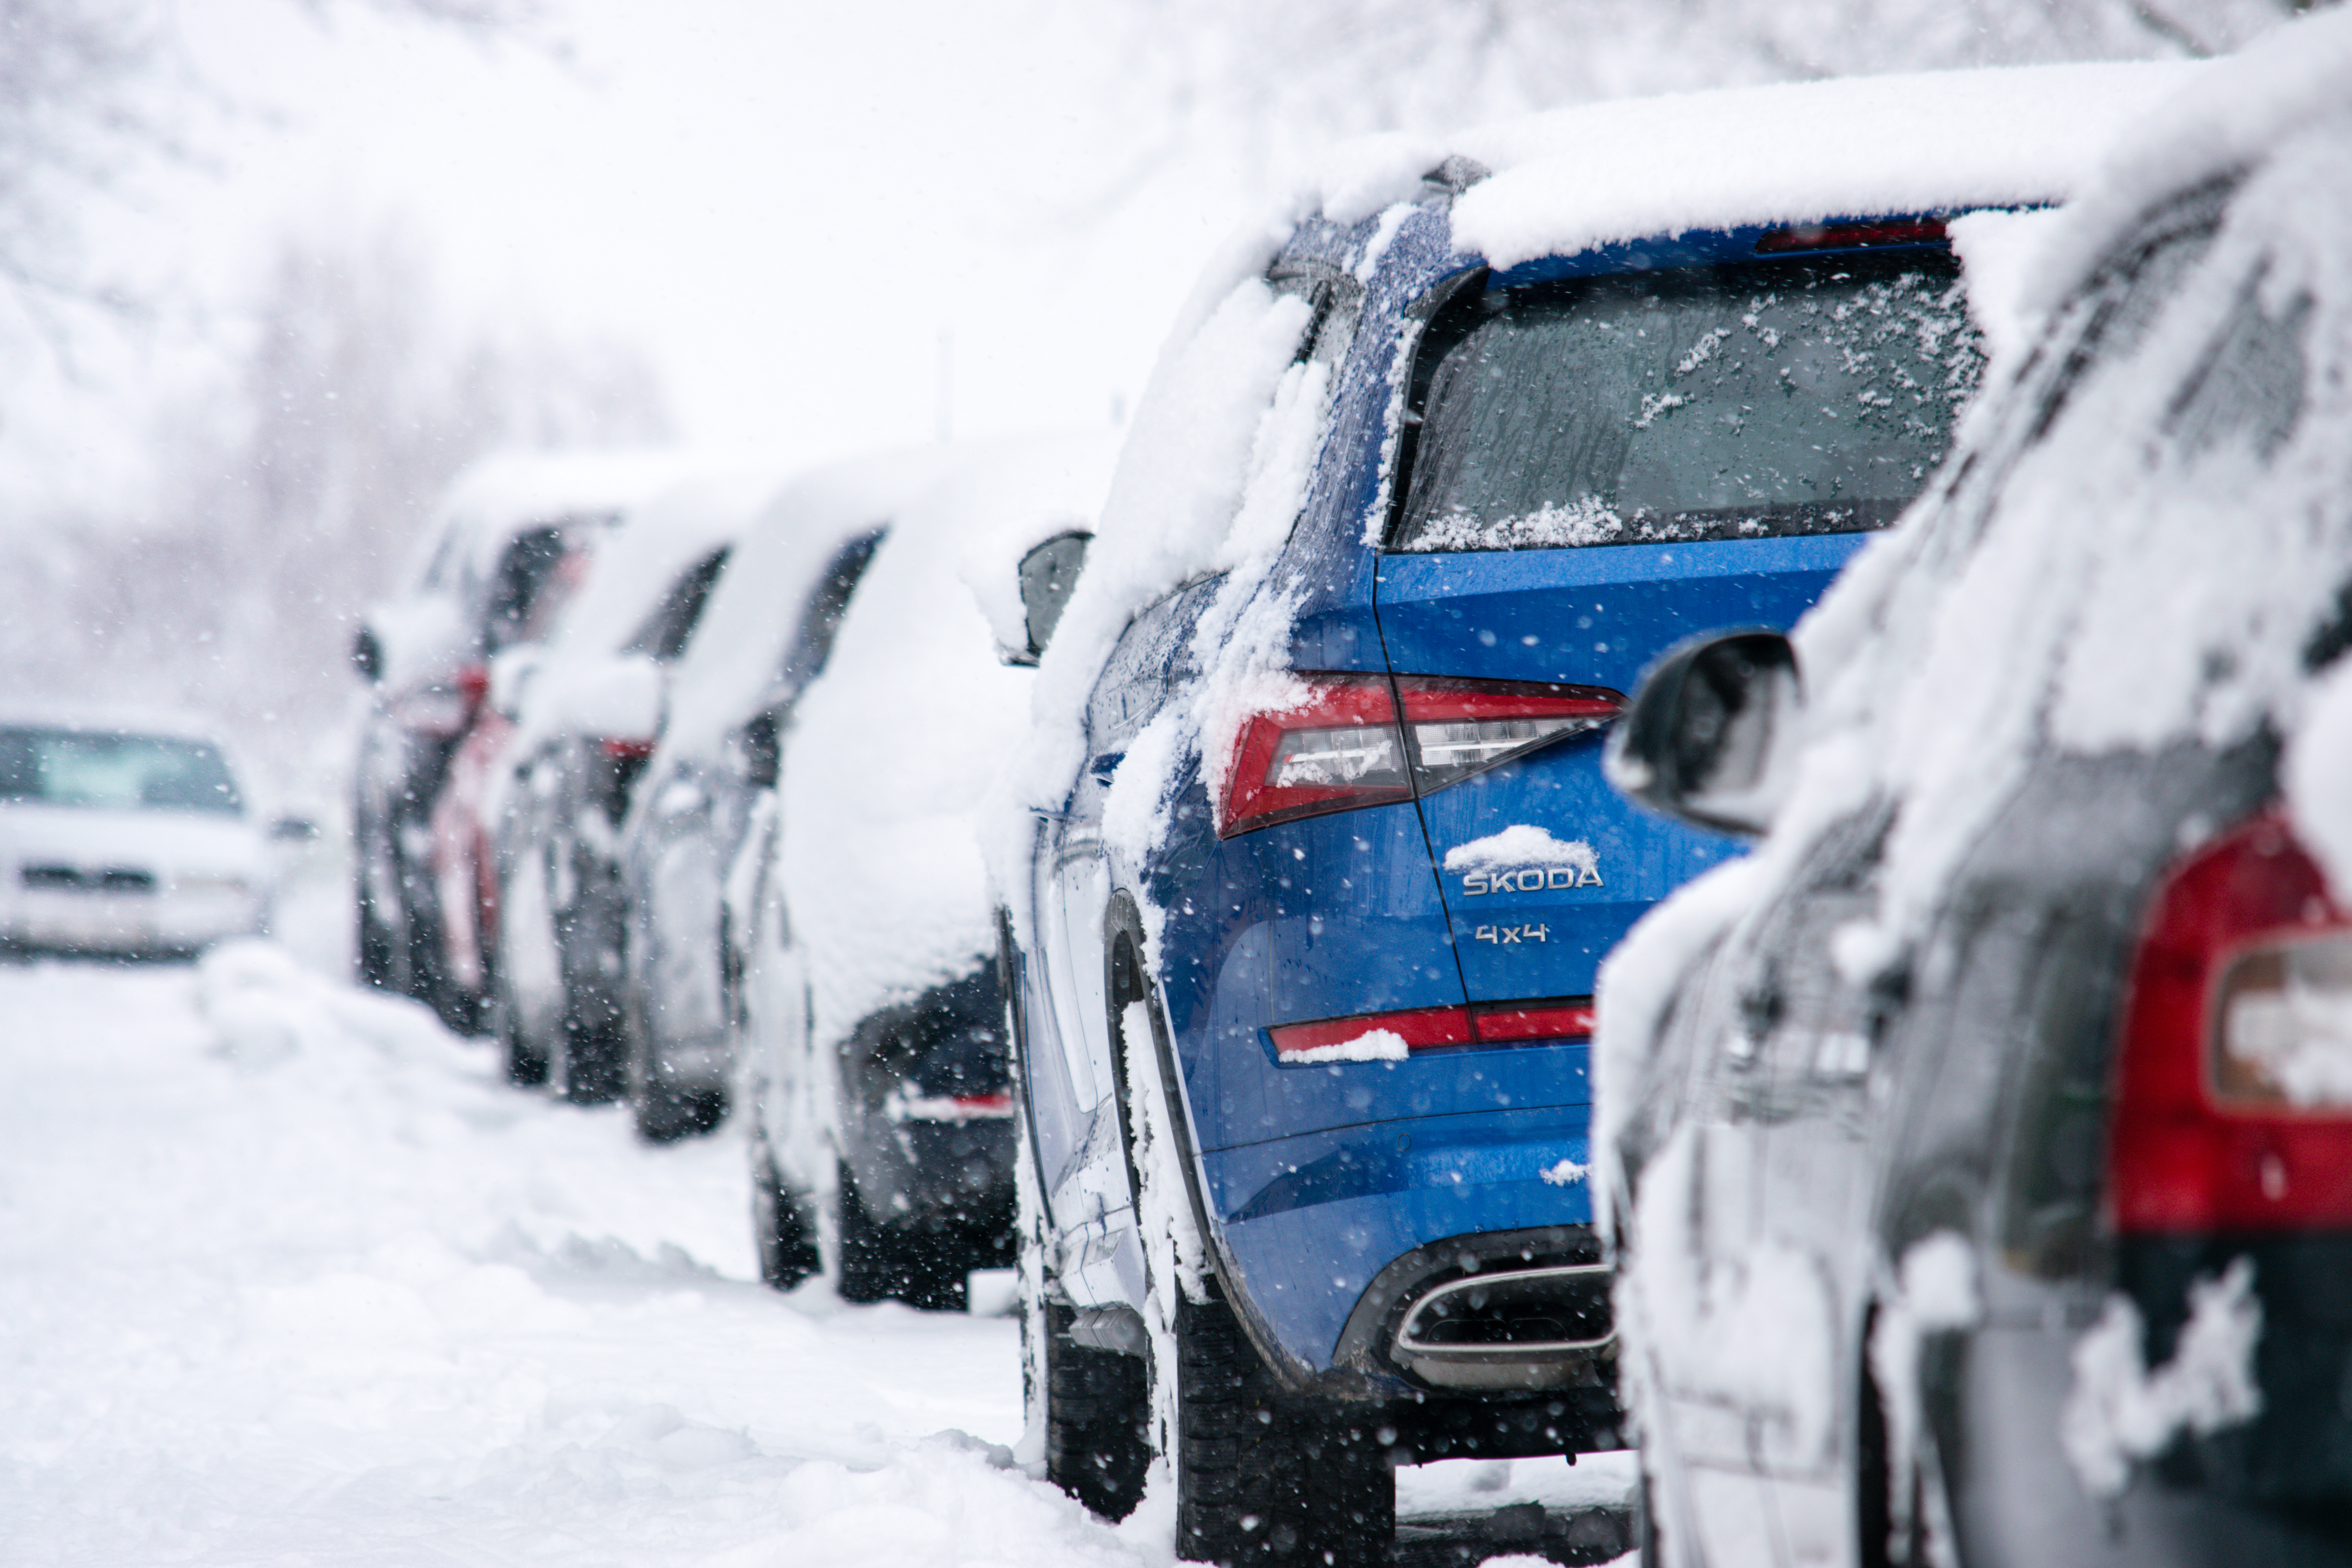 Cars parked in a row, covered in snow, highlighting winter conditions